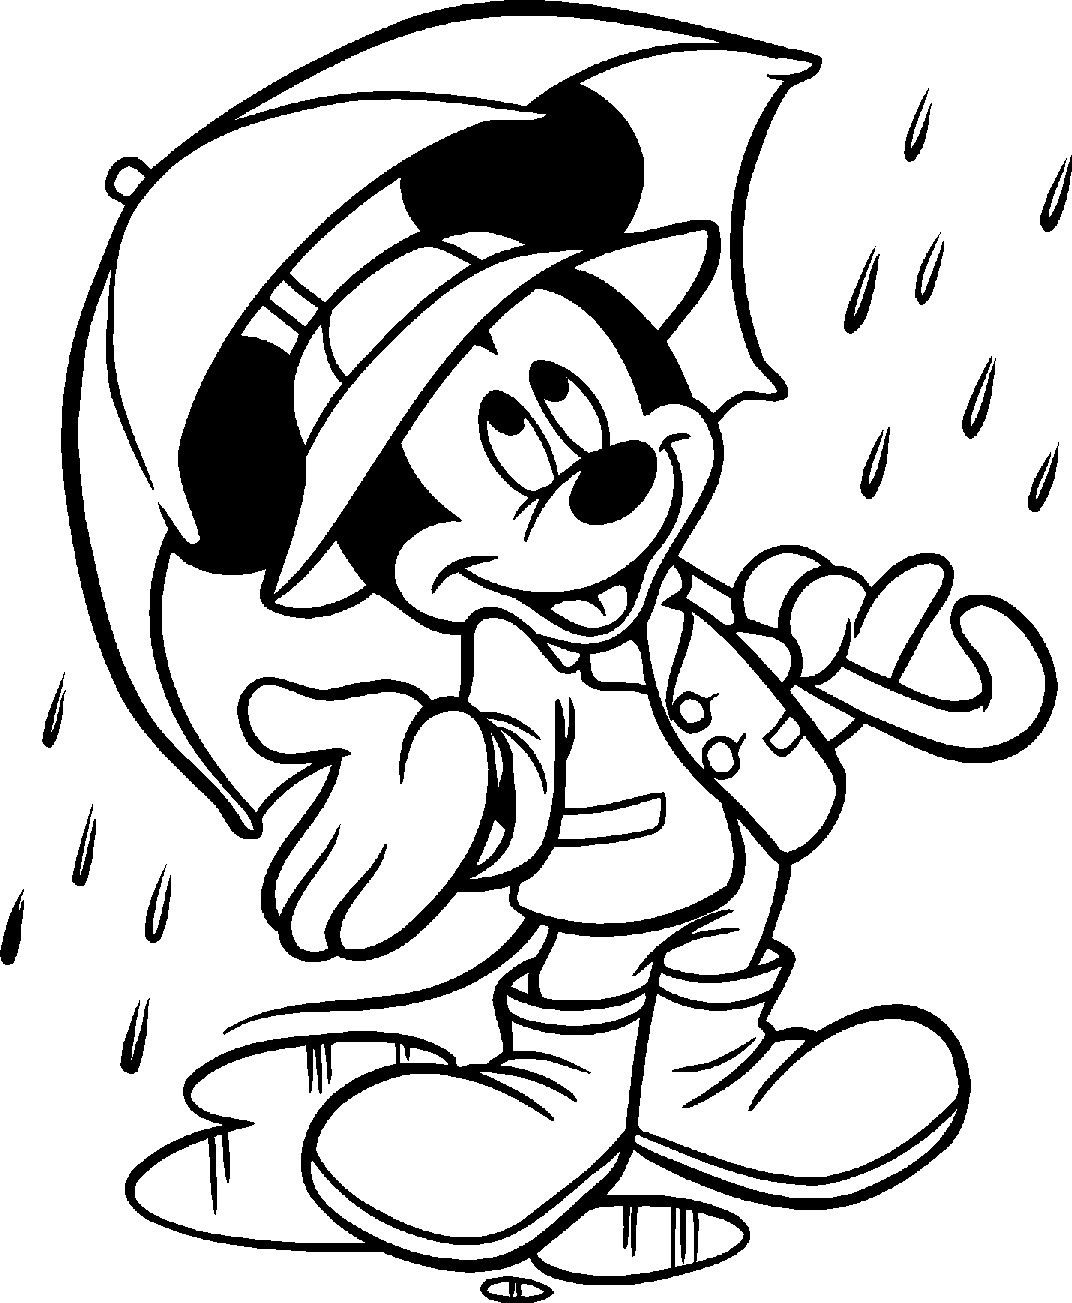 Cute Cartoon Characters Coloring Pages at GetColorings.com | Free